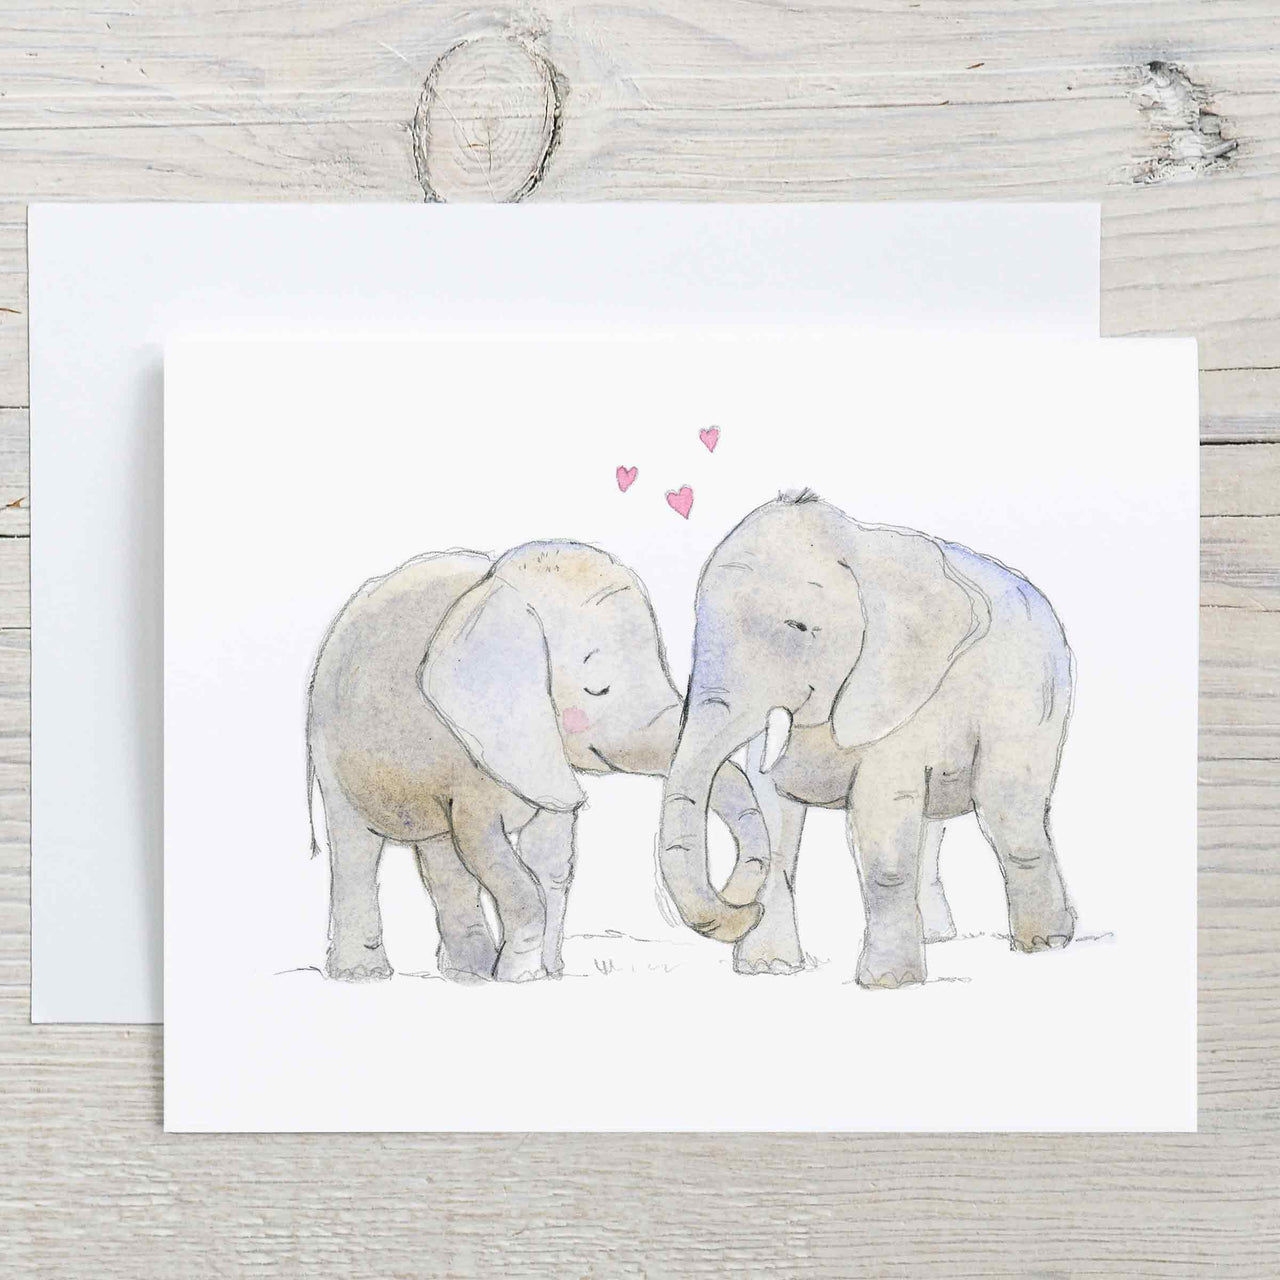 Elephant Card for Valentine's Day